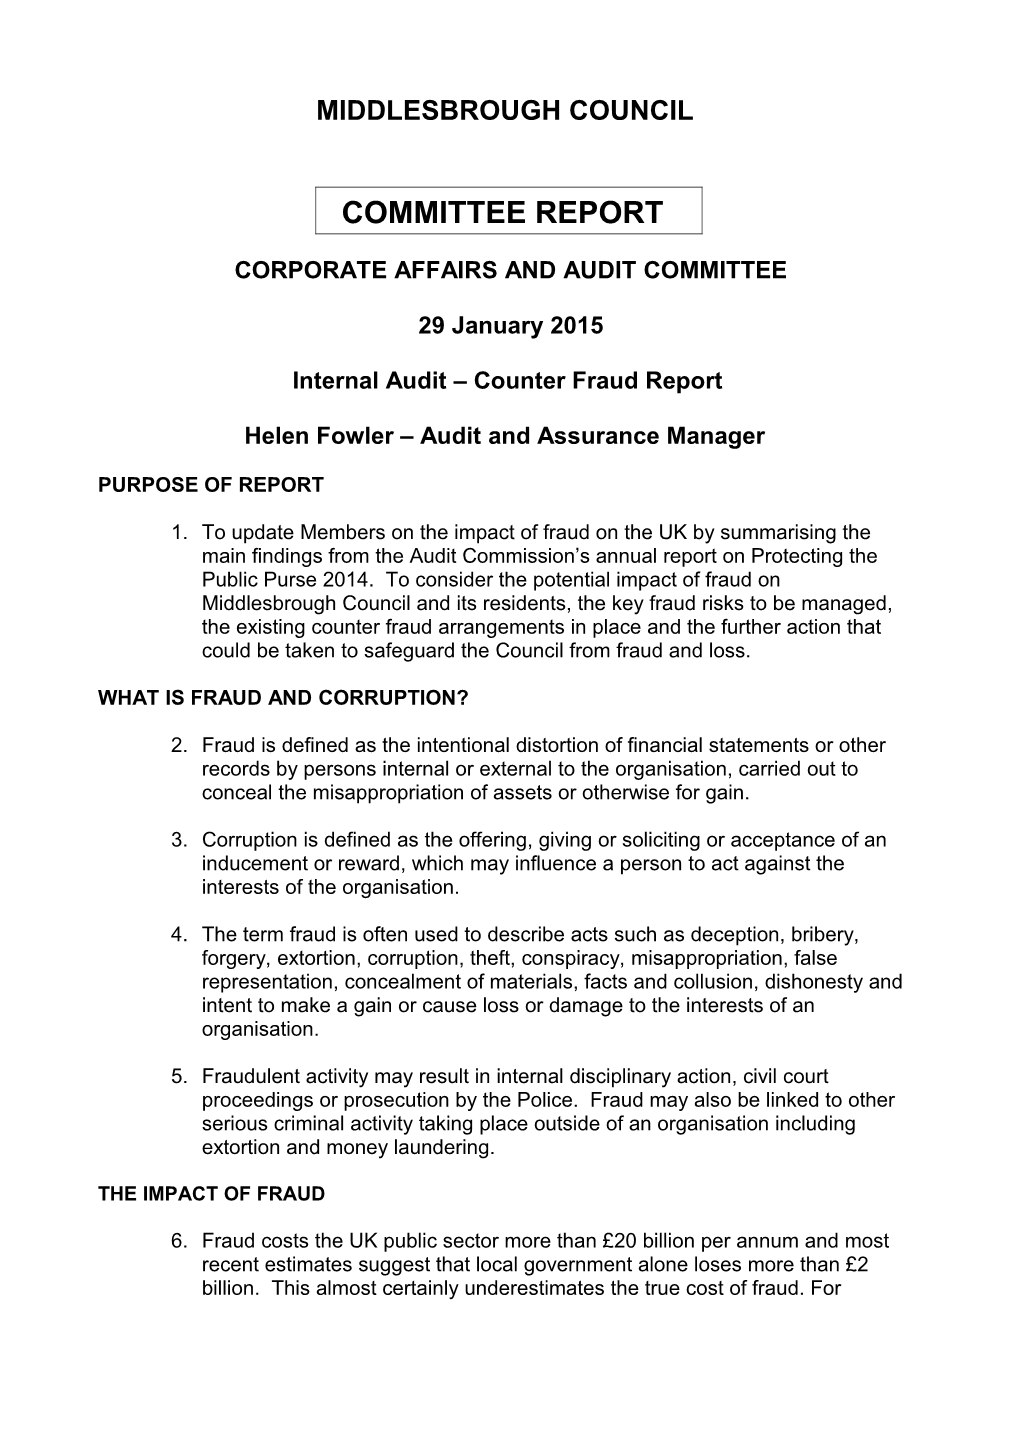 Corporate Affairs and Audit Committee